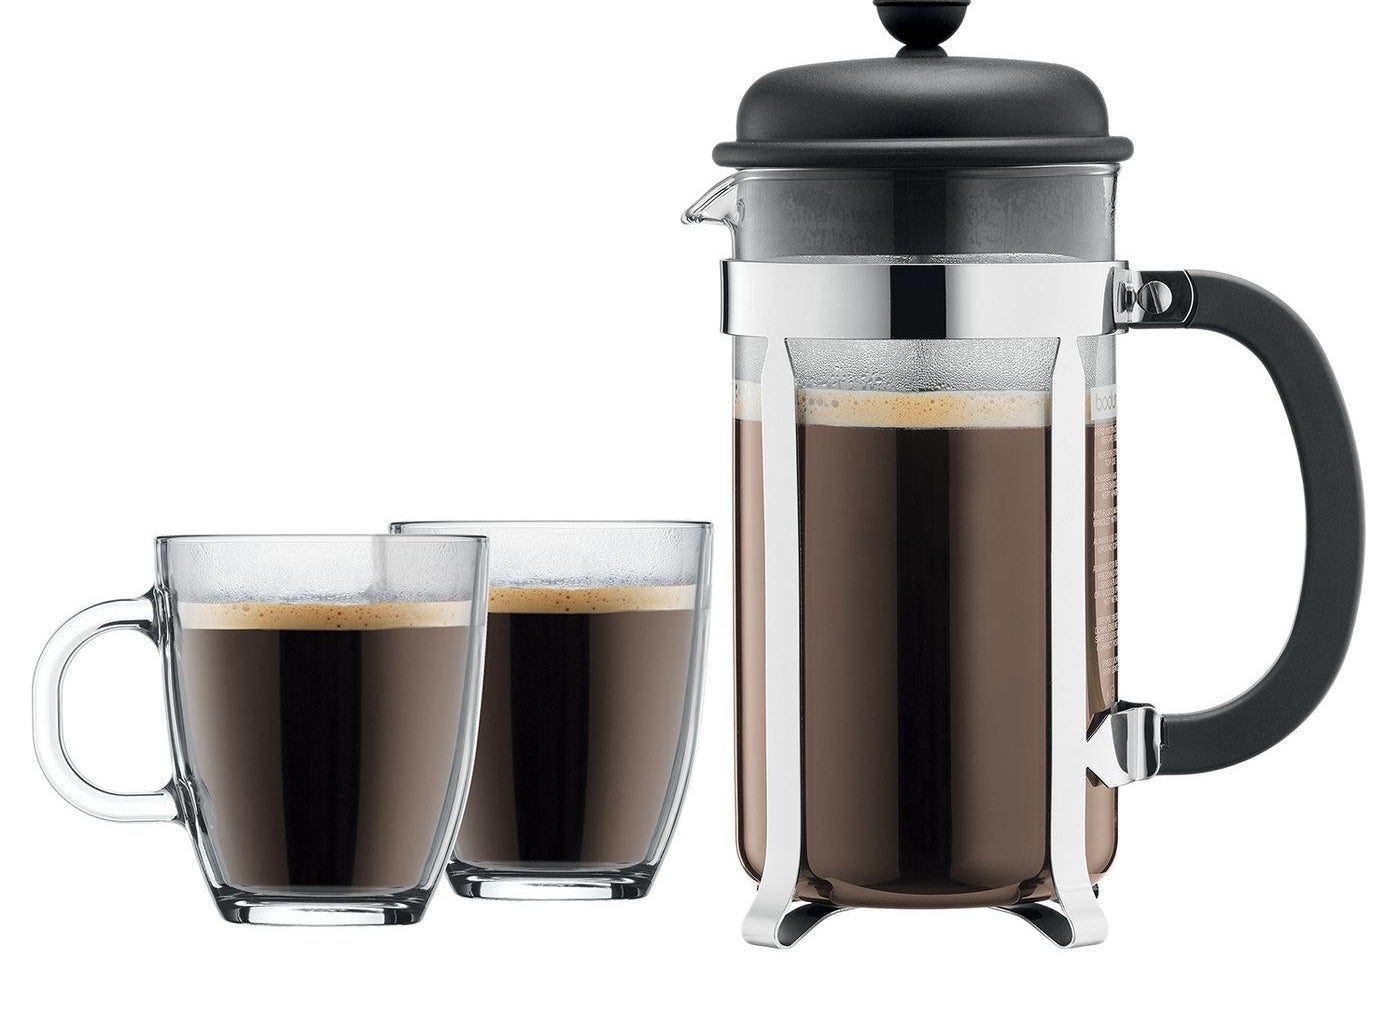 A French press coffee maker and two glass mugs